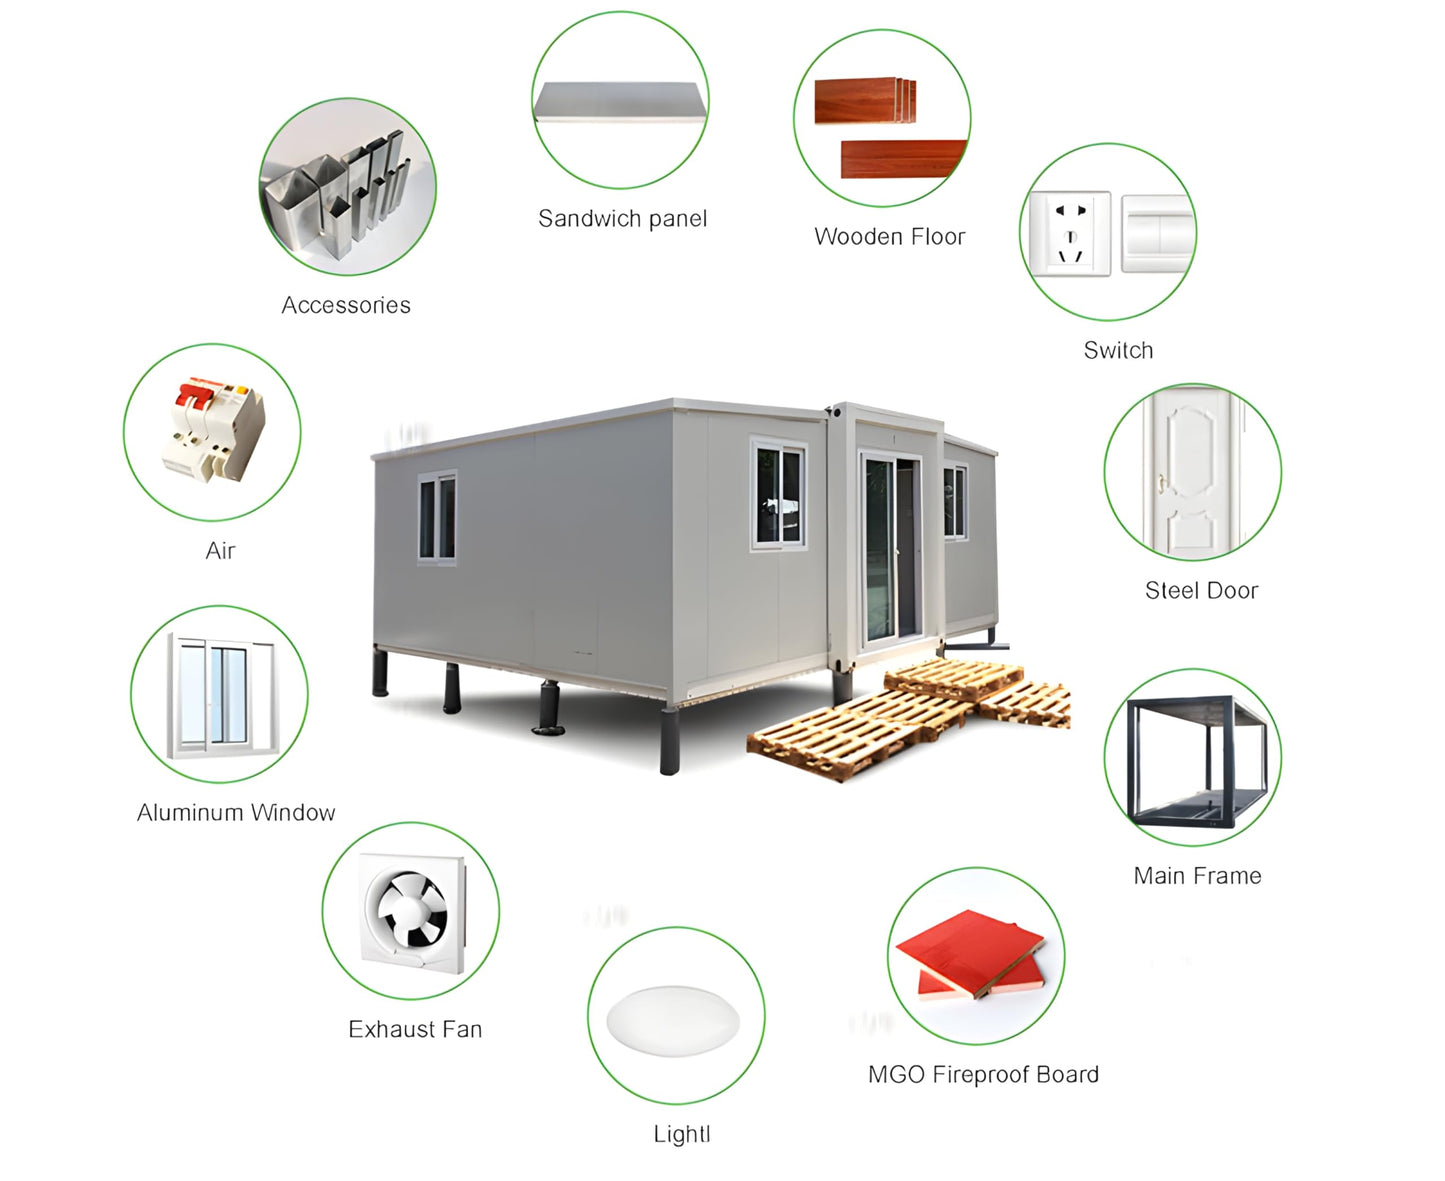 Prime Porch Fully Furnished Modular Tiny Home for Sale, Prefab Container House 19x20ft, Portable, with 1 Bedroom and Restroom - Ideal for Small Houses, Backyard Office, Mobile House